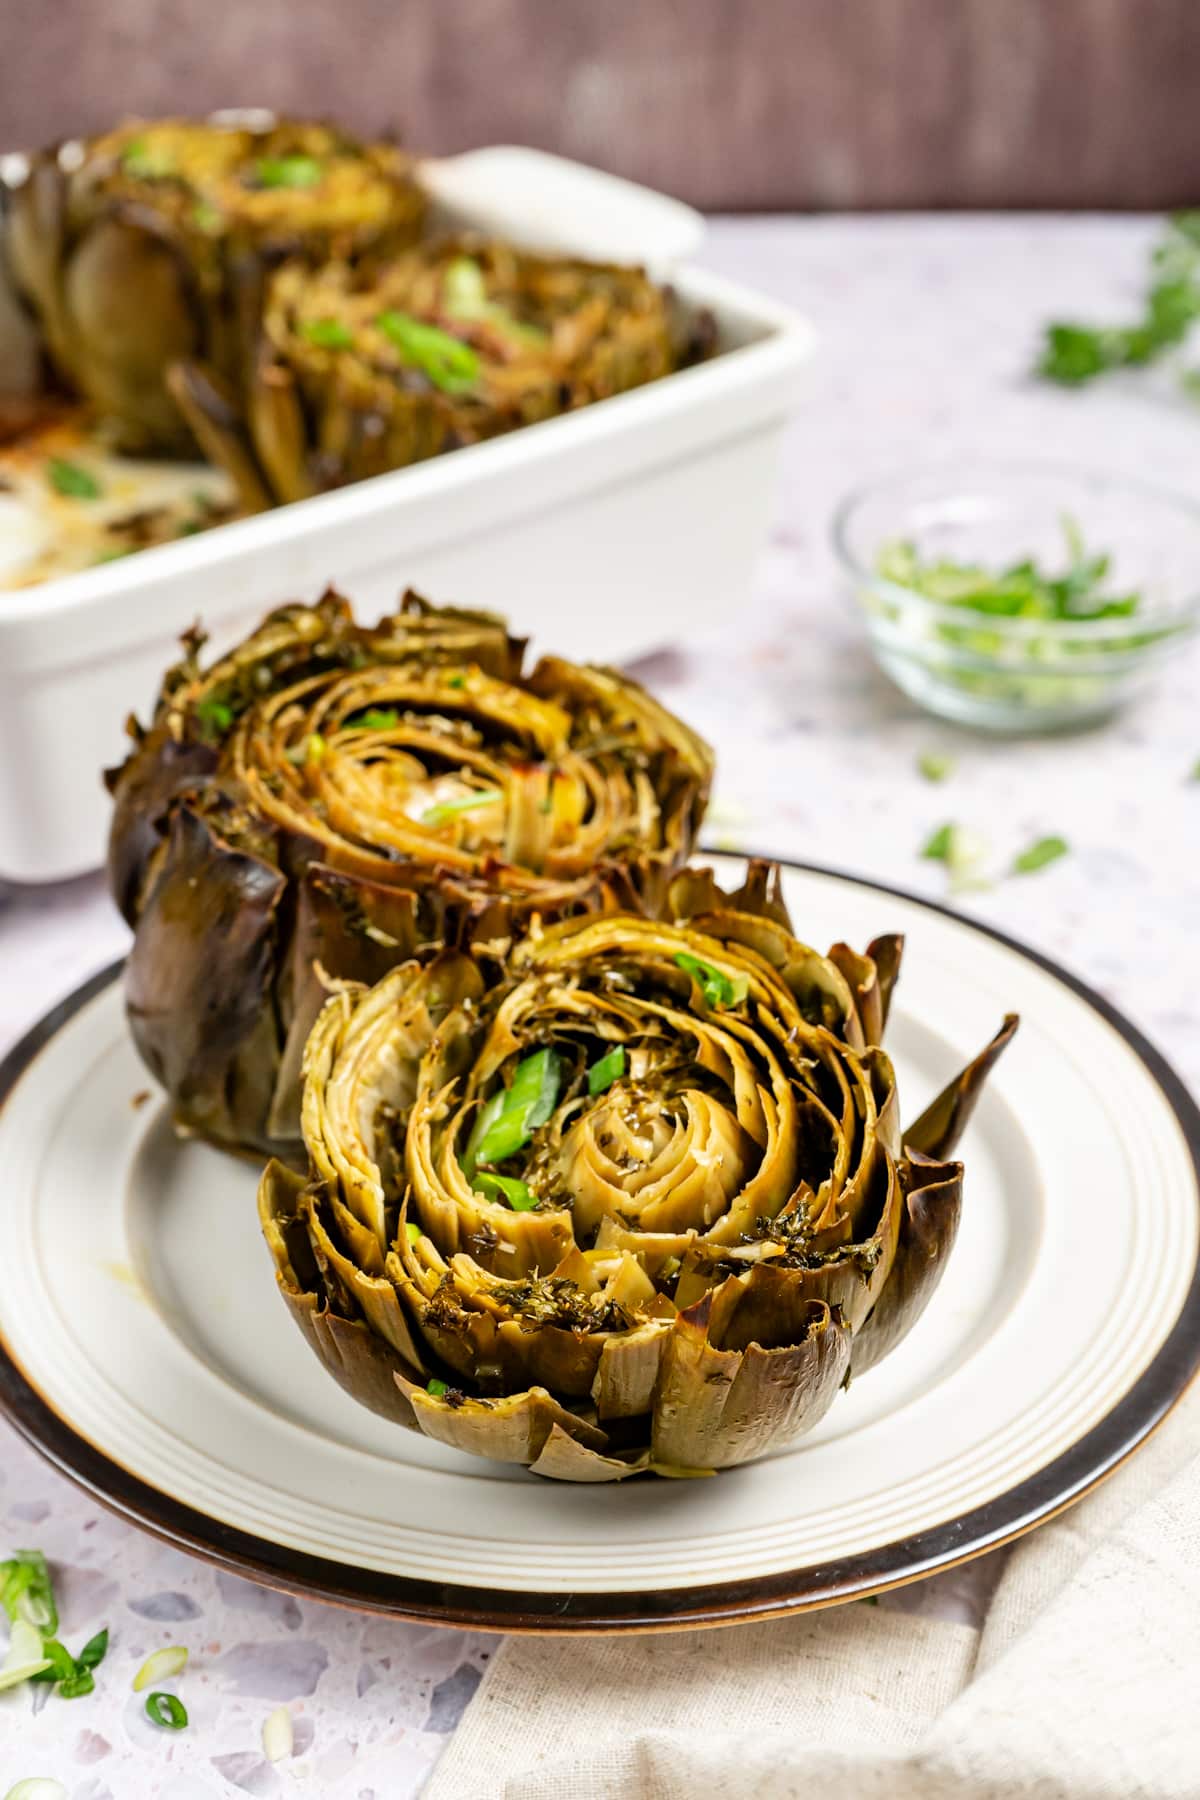 Two cooked artichokes on a plate. 